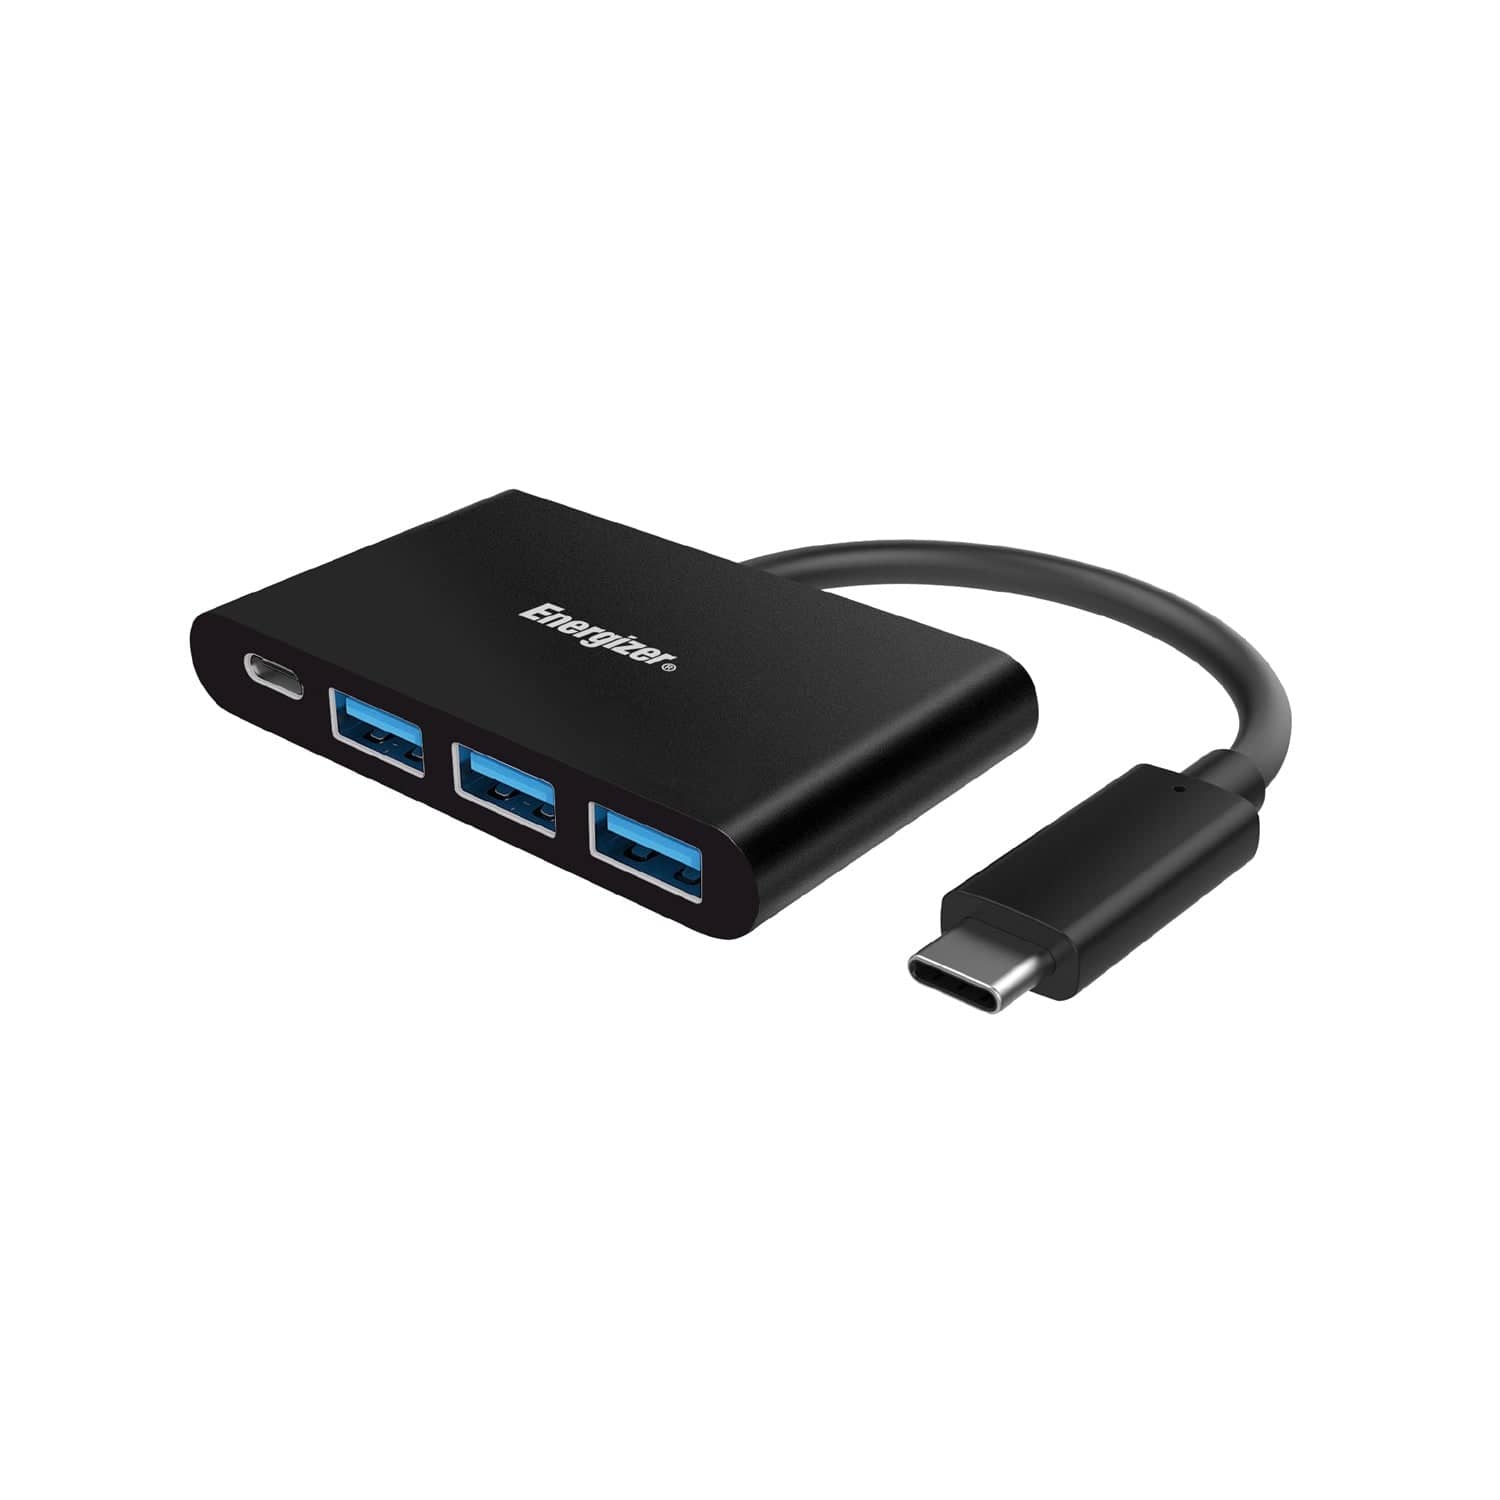 Energizer USB Type-C 3.1 to USB-A 3.0 Multiport Hub